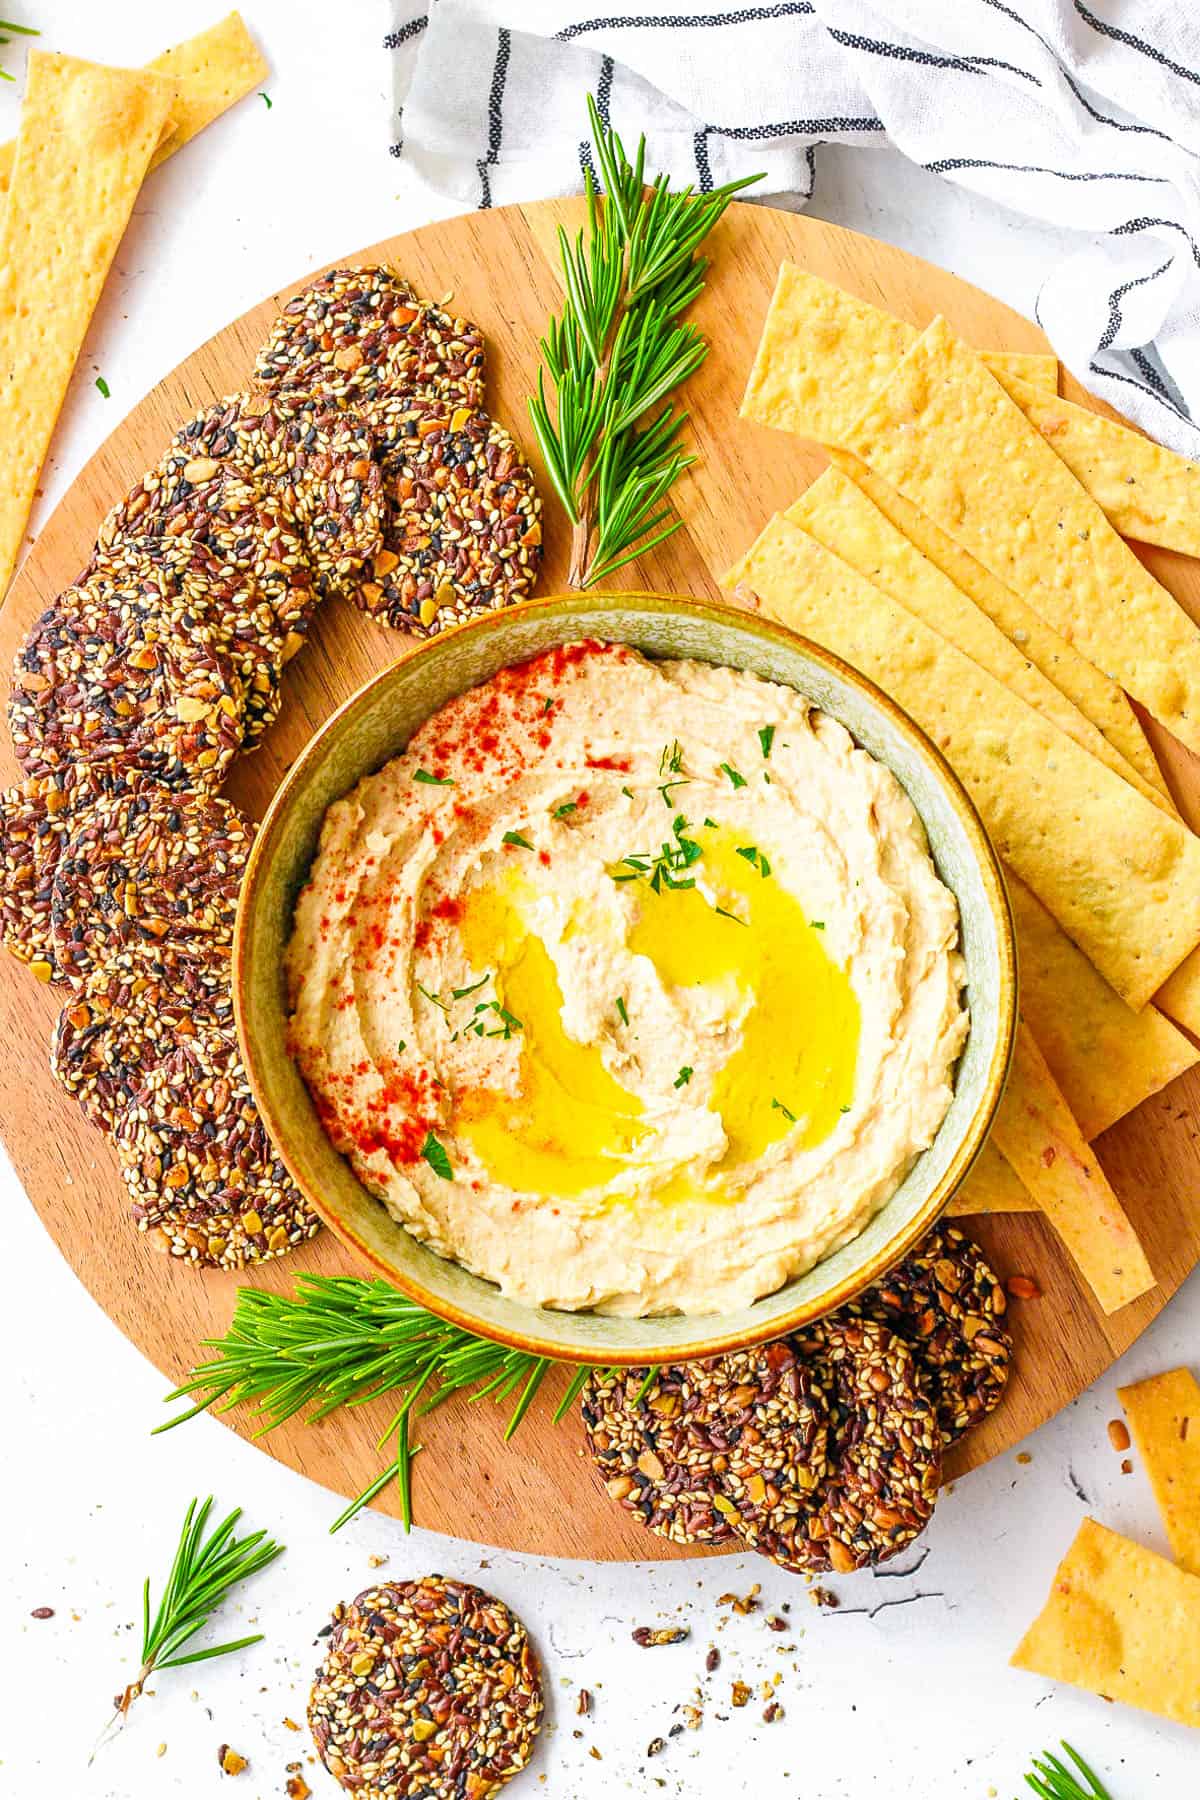 Butter bean hummus served in a bowl, with olive oil drizzled on top and crackers on the side.